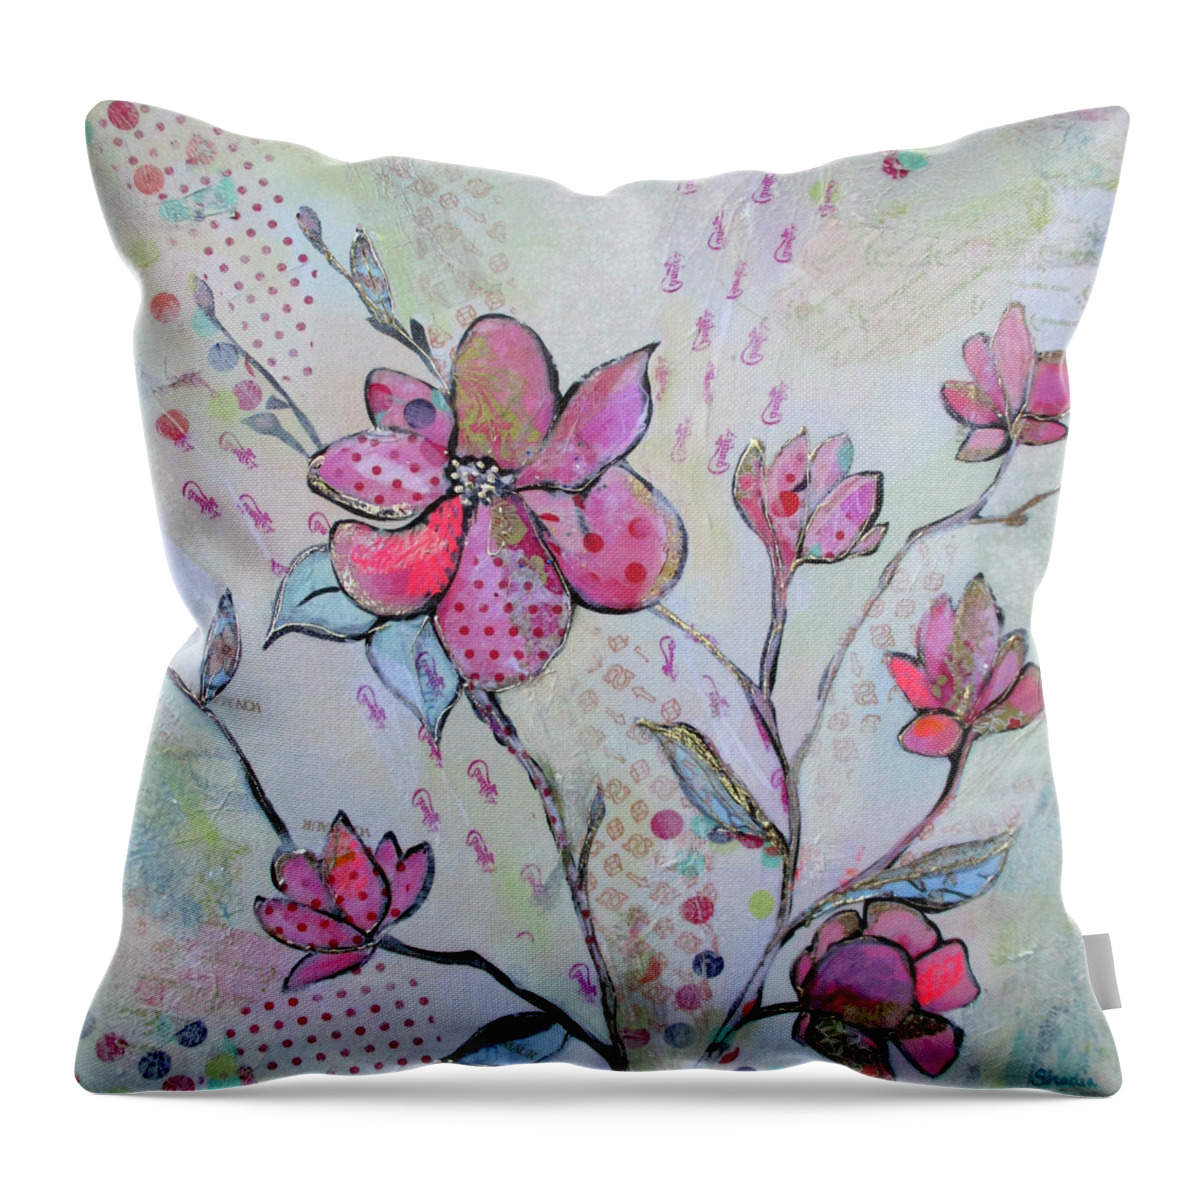 Pink Throw Pillow featuring the painting Spring Reverie III by Shadia Derbyshire